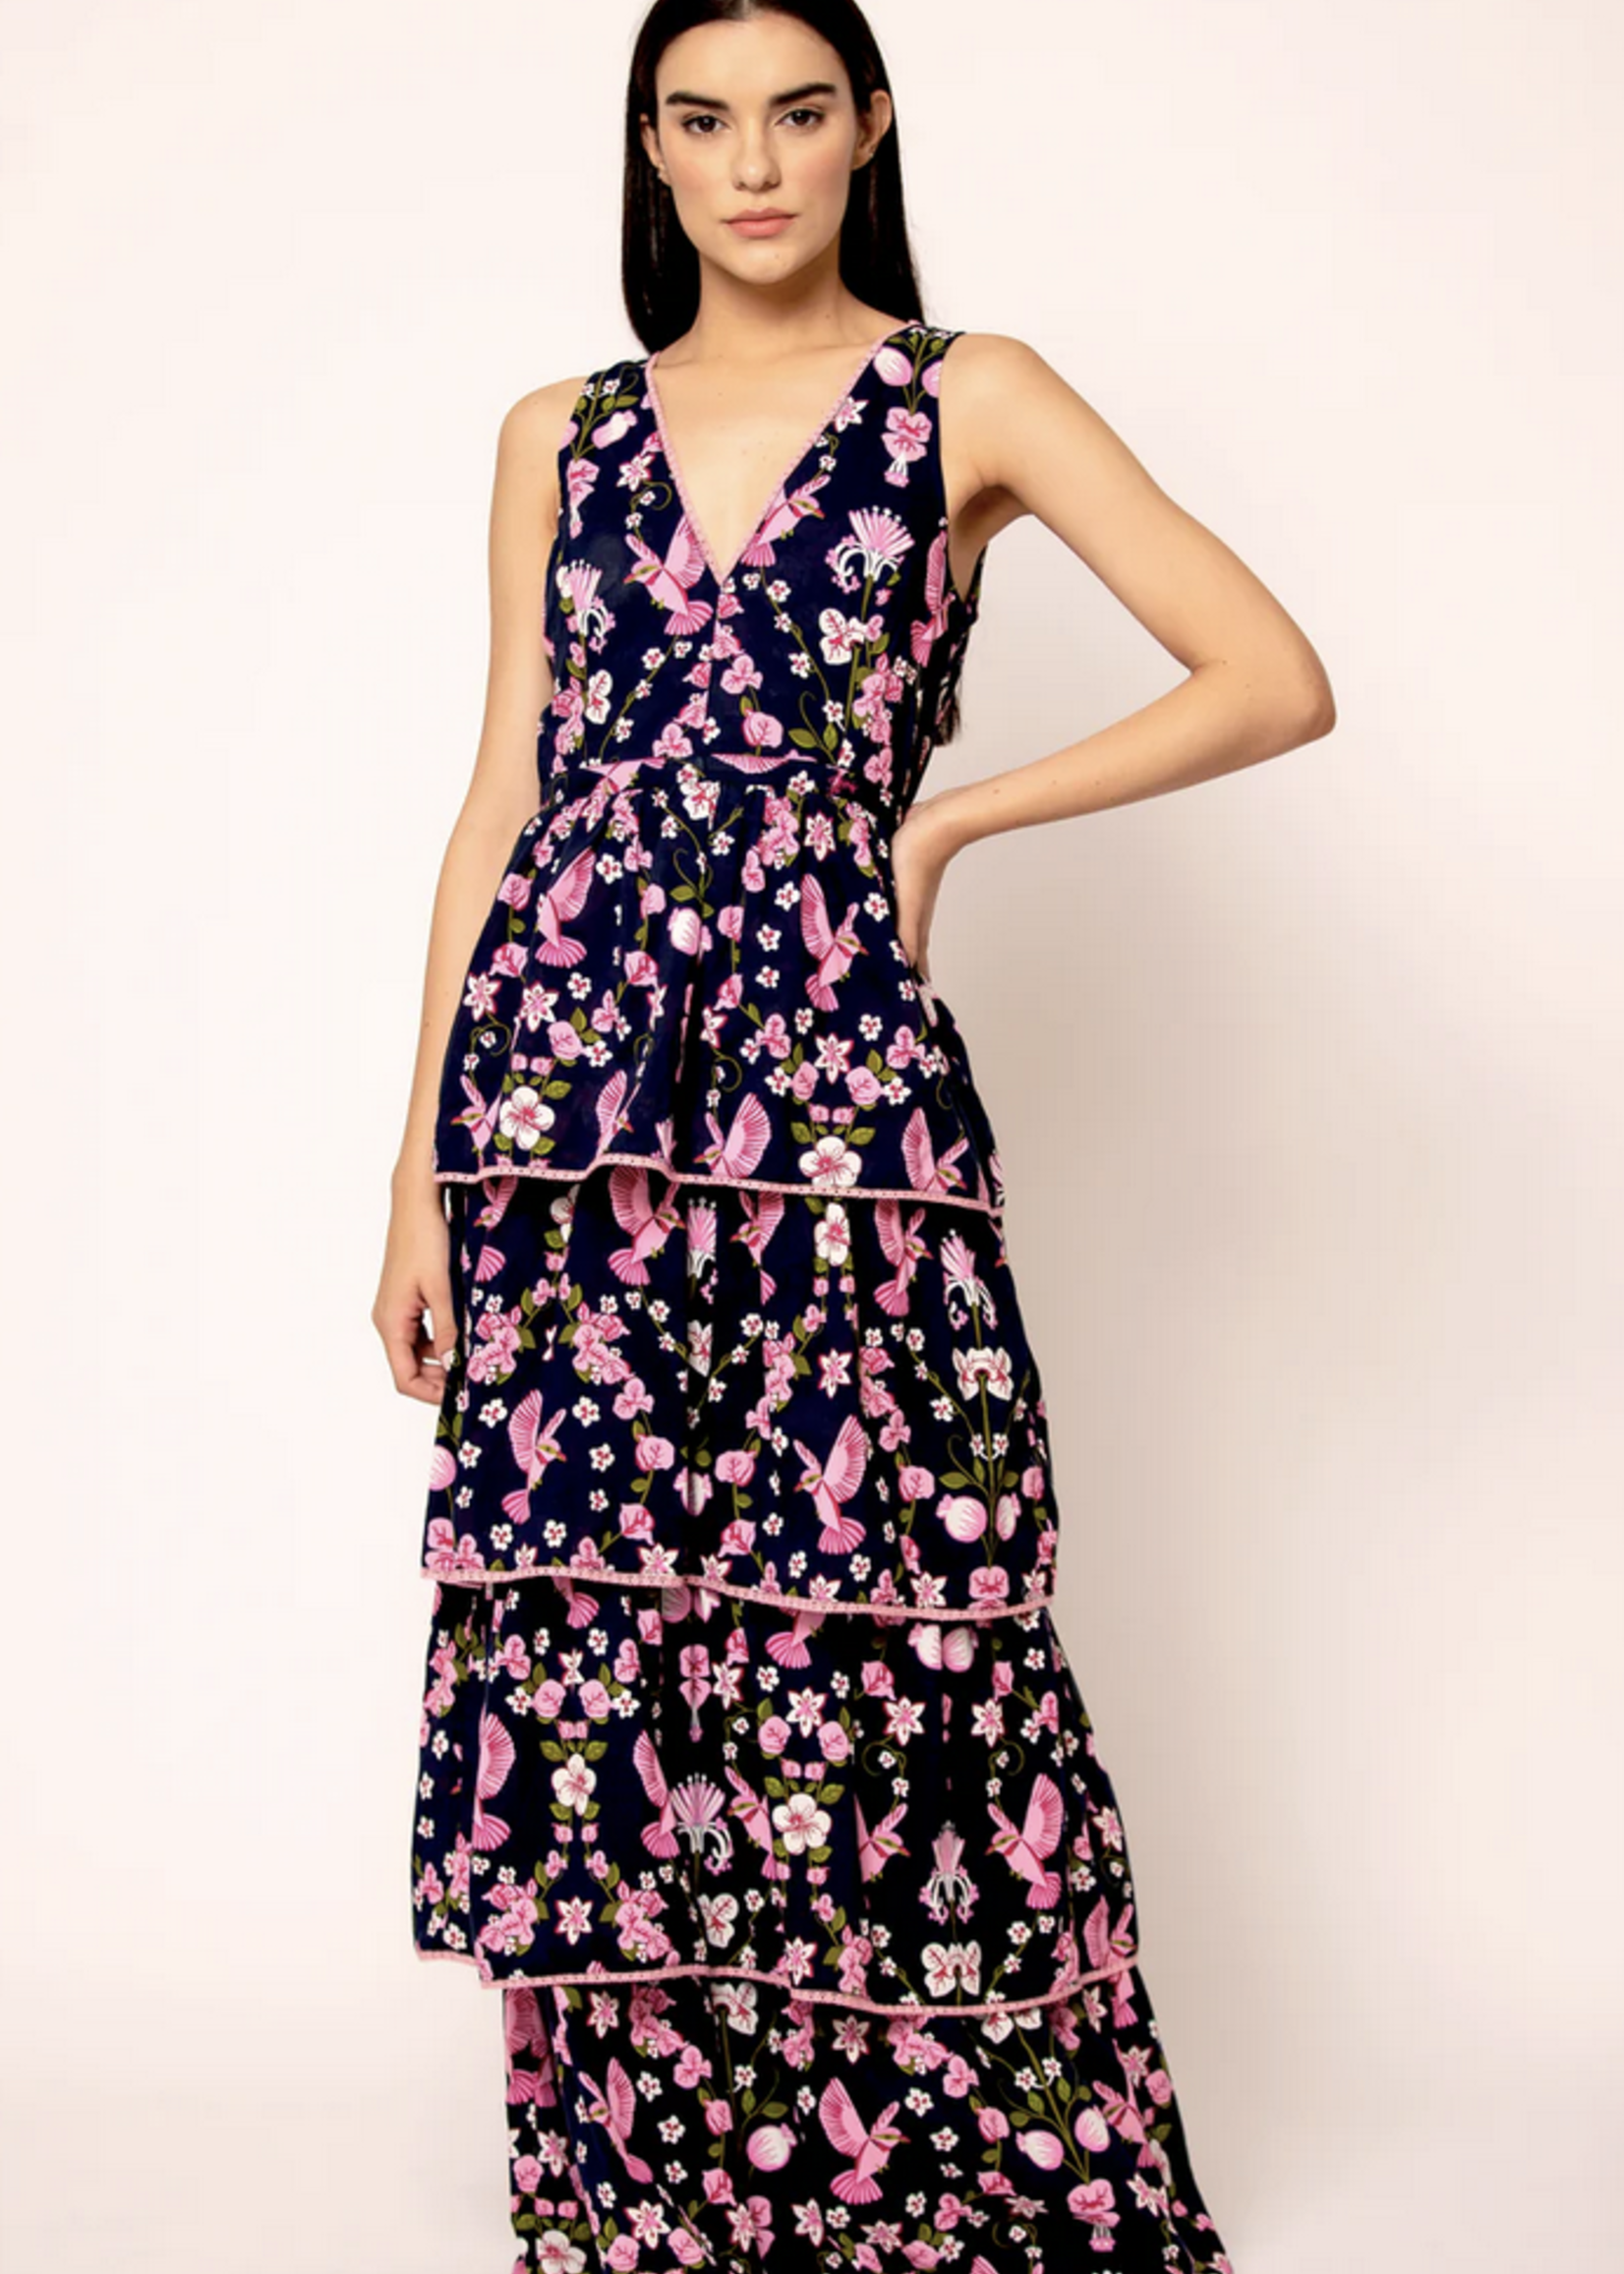 BEYOND BY VERA CECILE MAXI DRESS